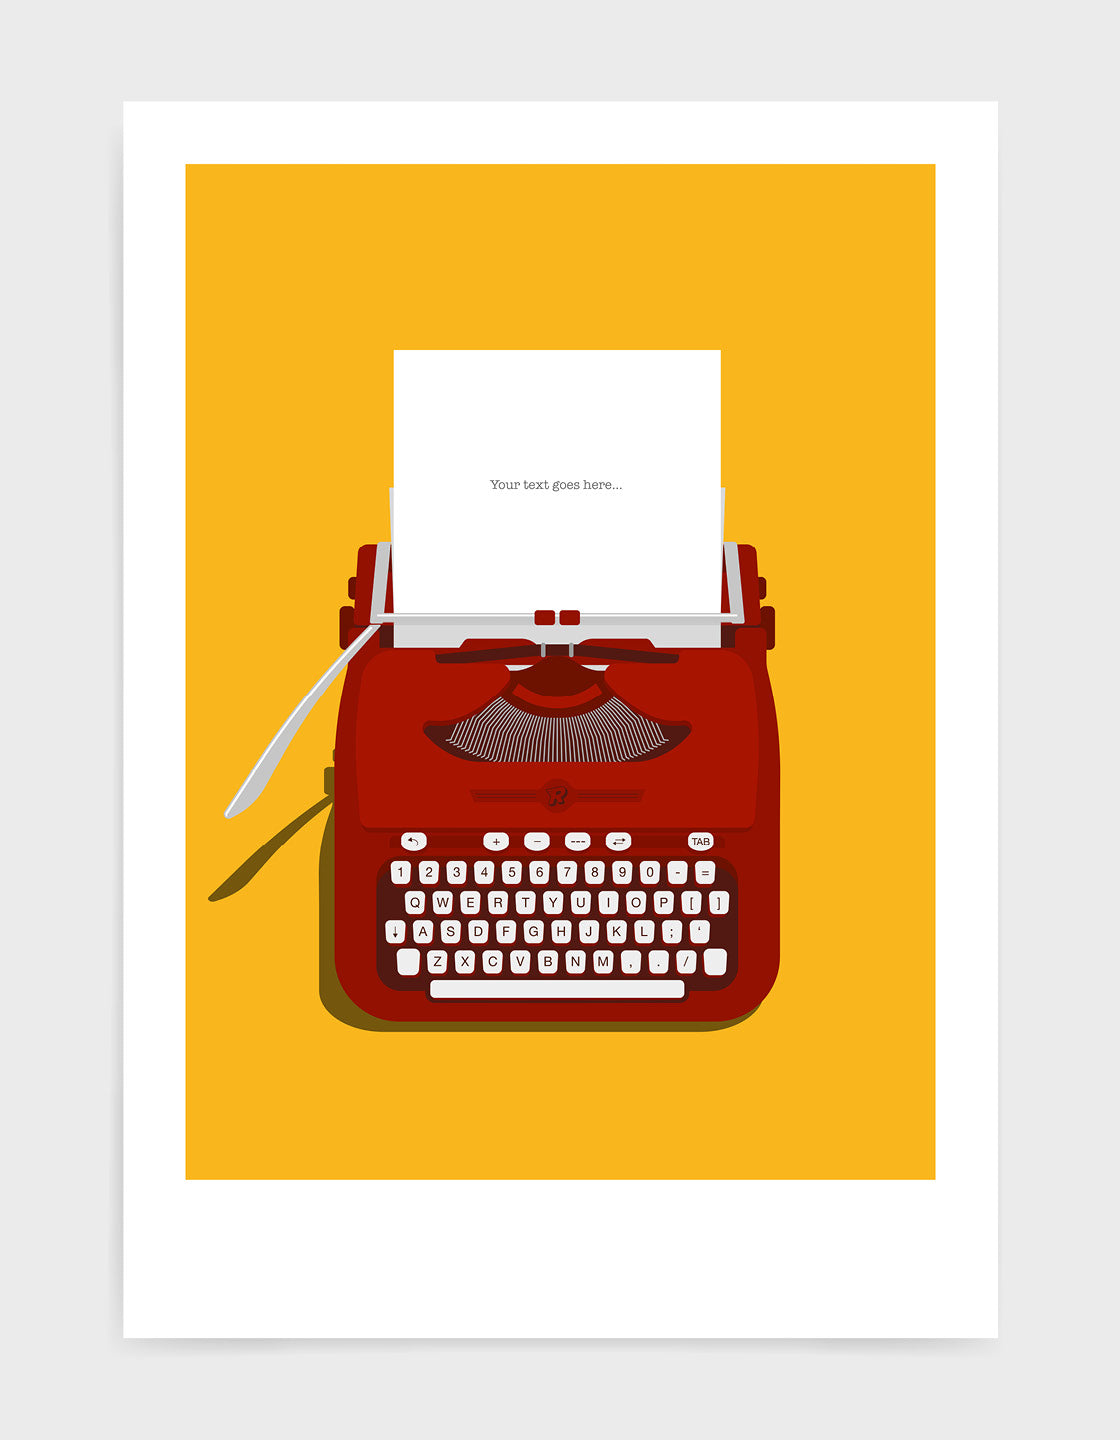 Art print showing a retro vintage typewriter in red with paper in the top and space to personalise the text. Set against a bright yellow background